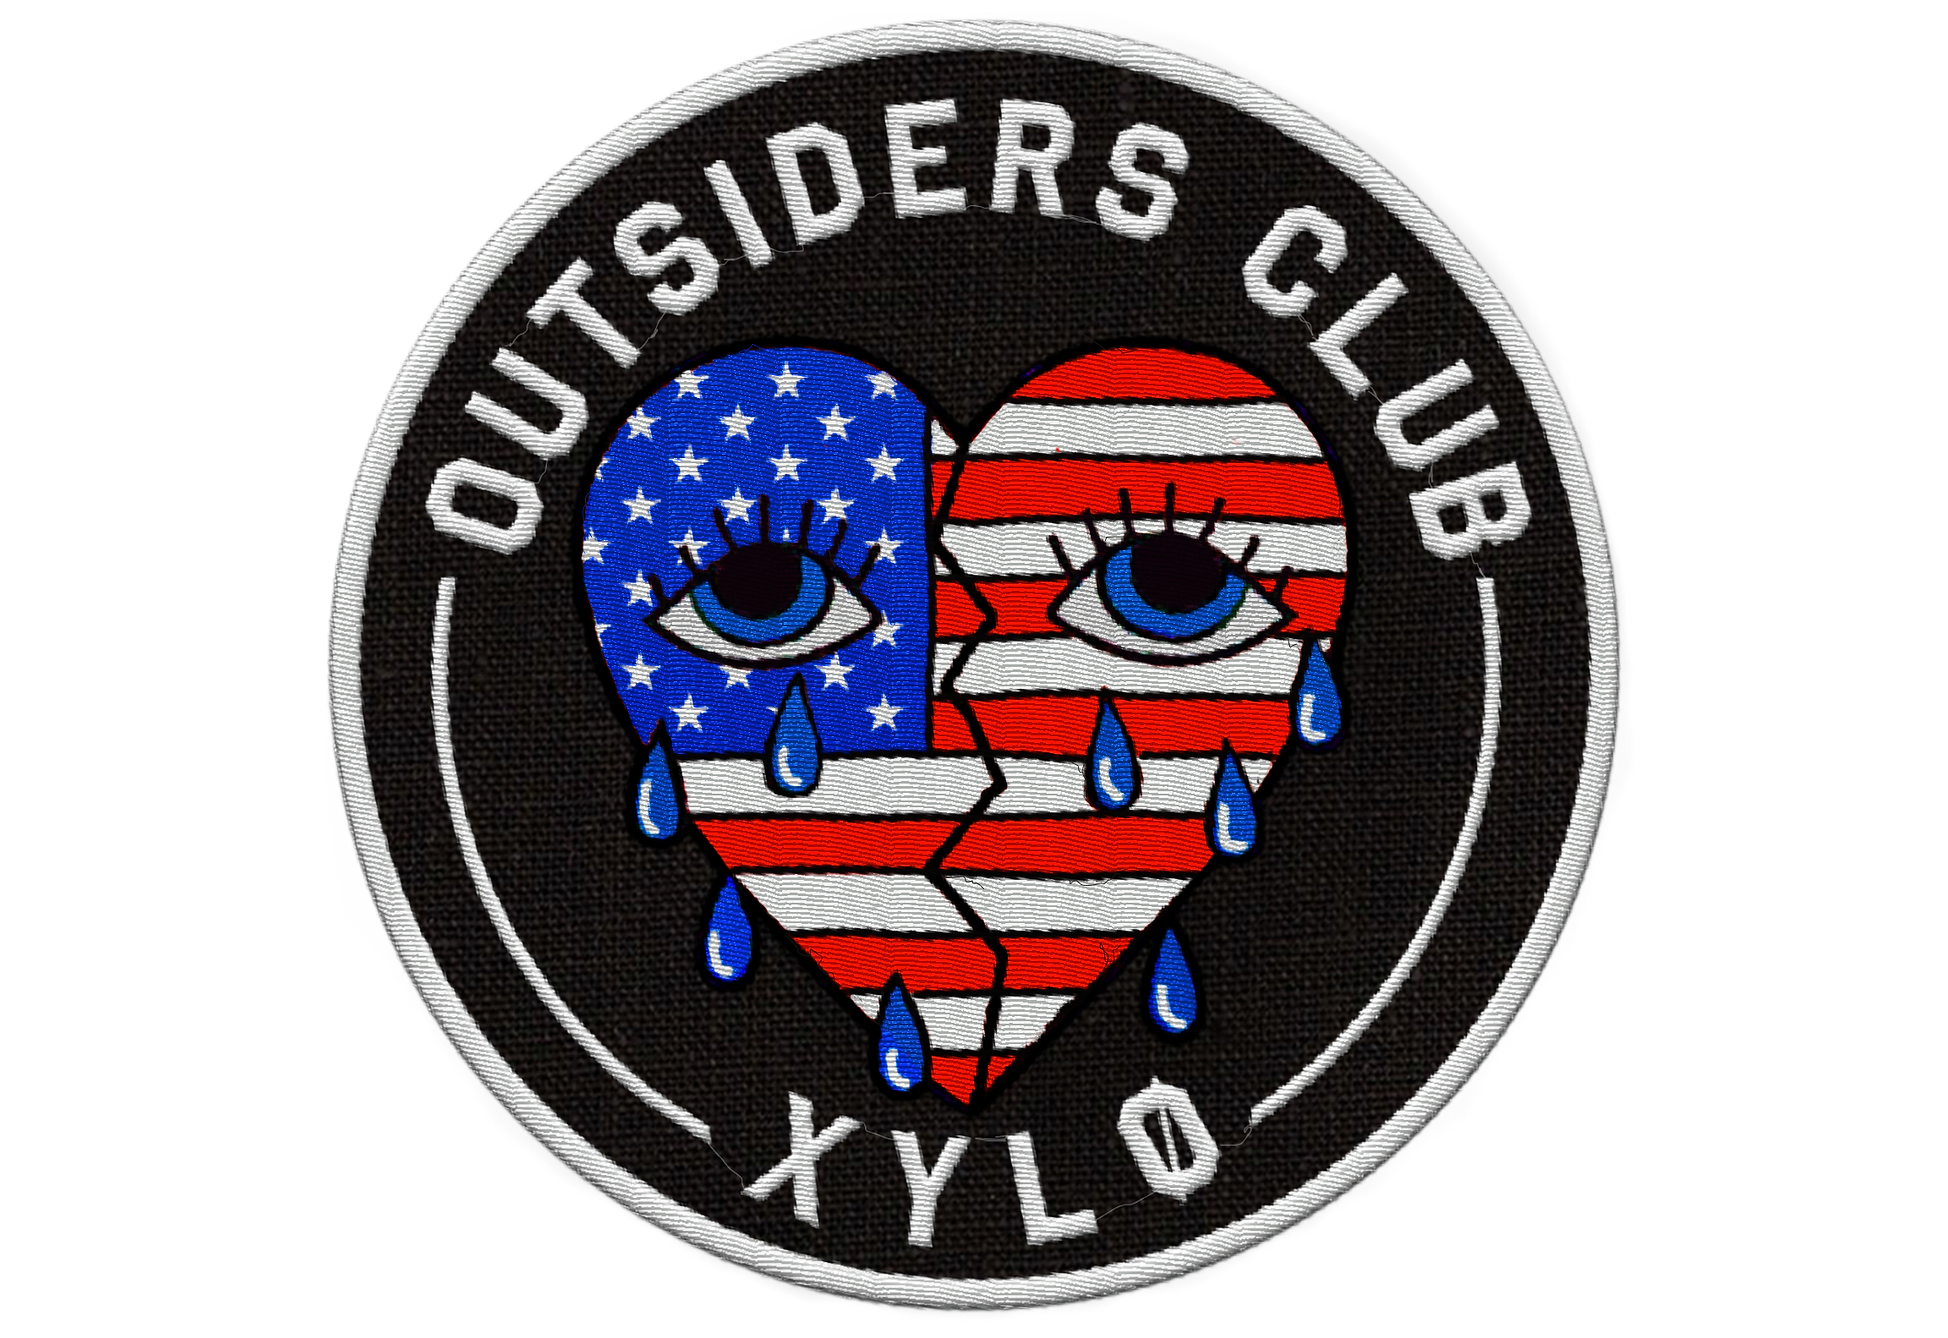 UNAMERICAN BEAUTY - OUTSIDERS CLUB PATCH